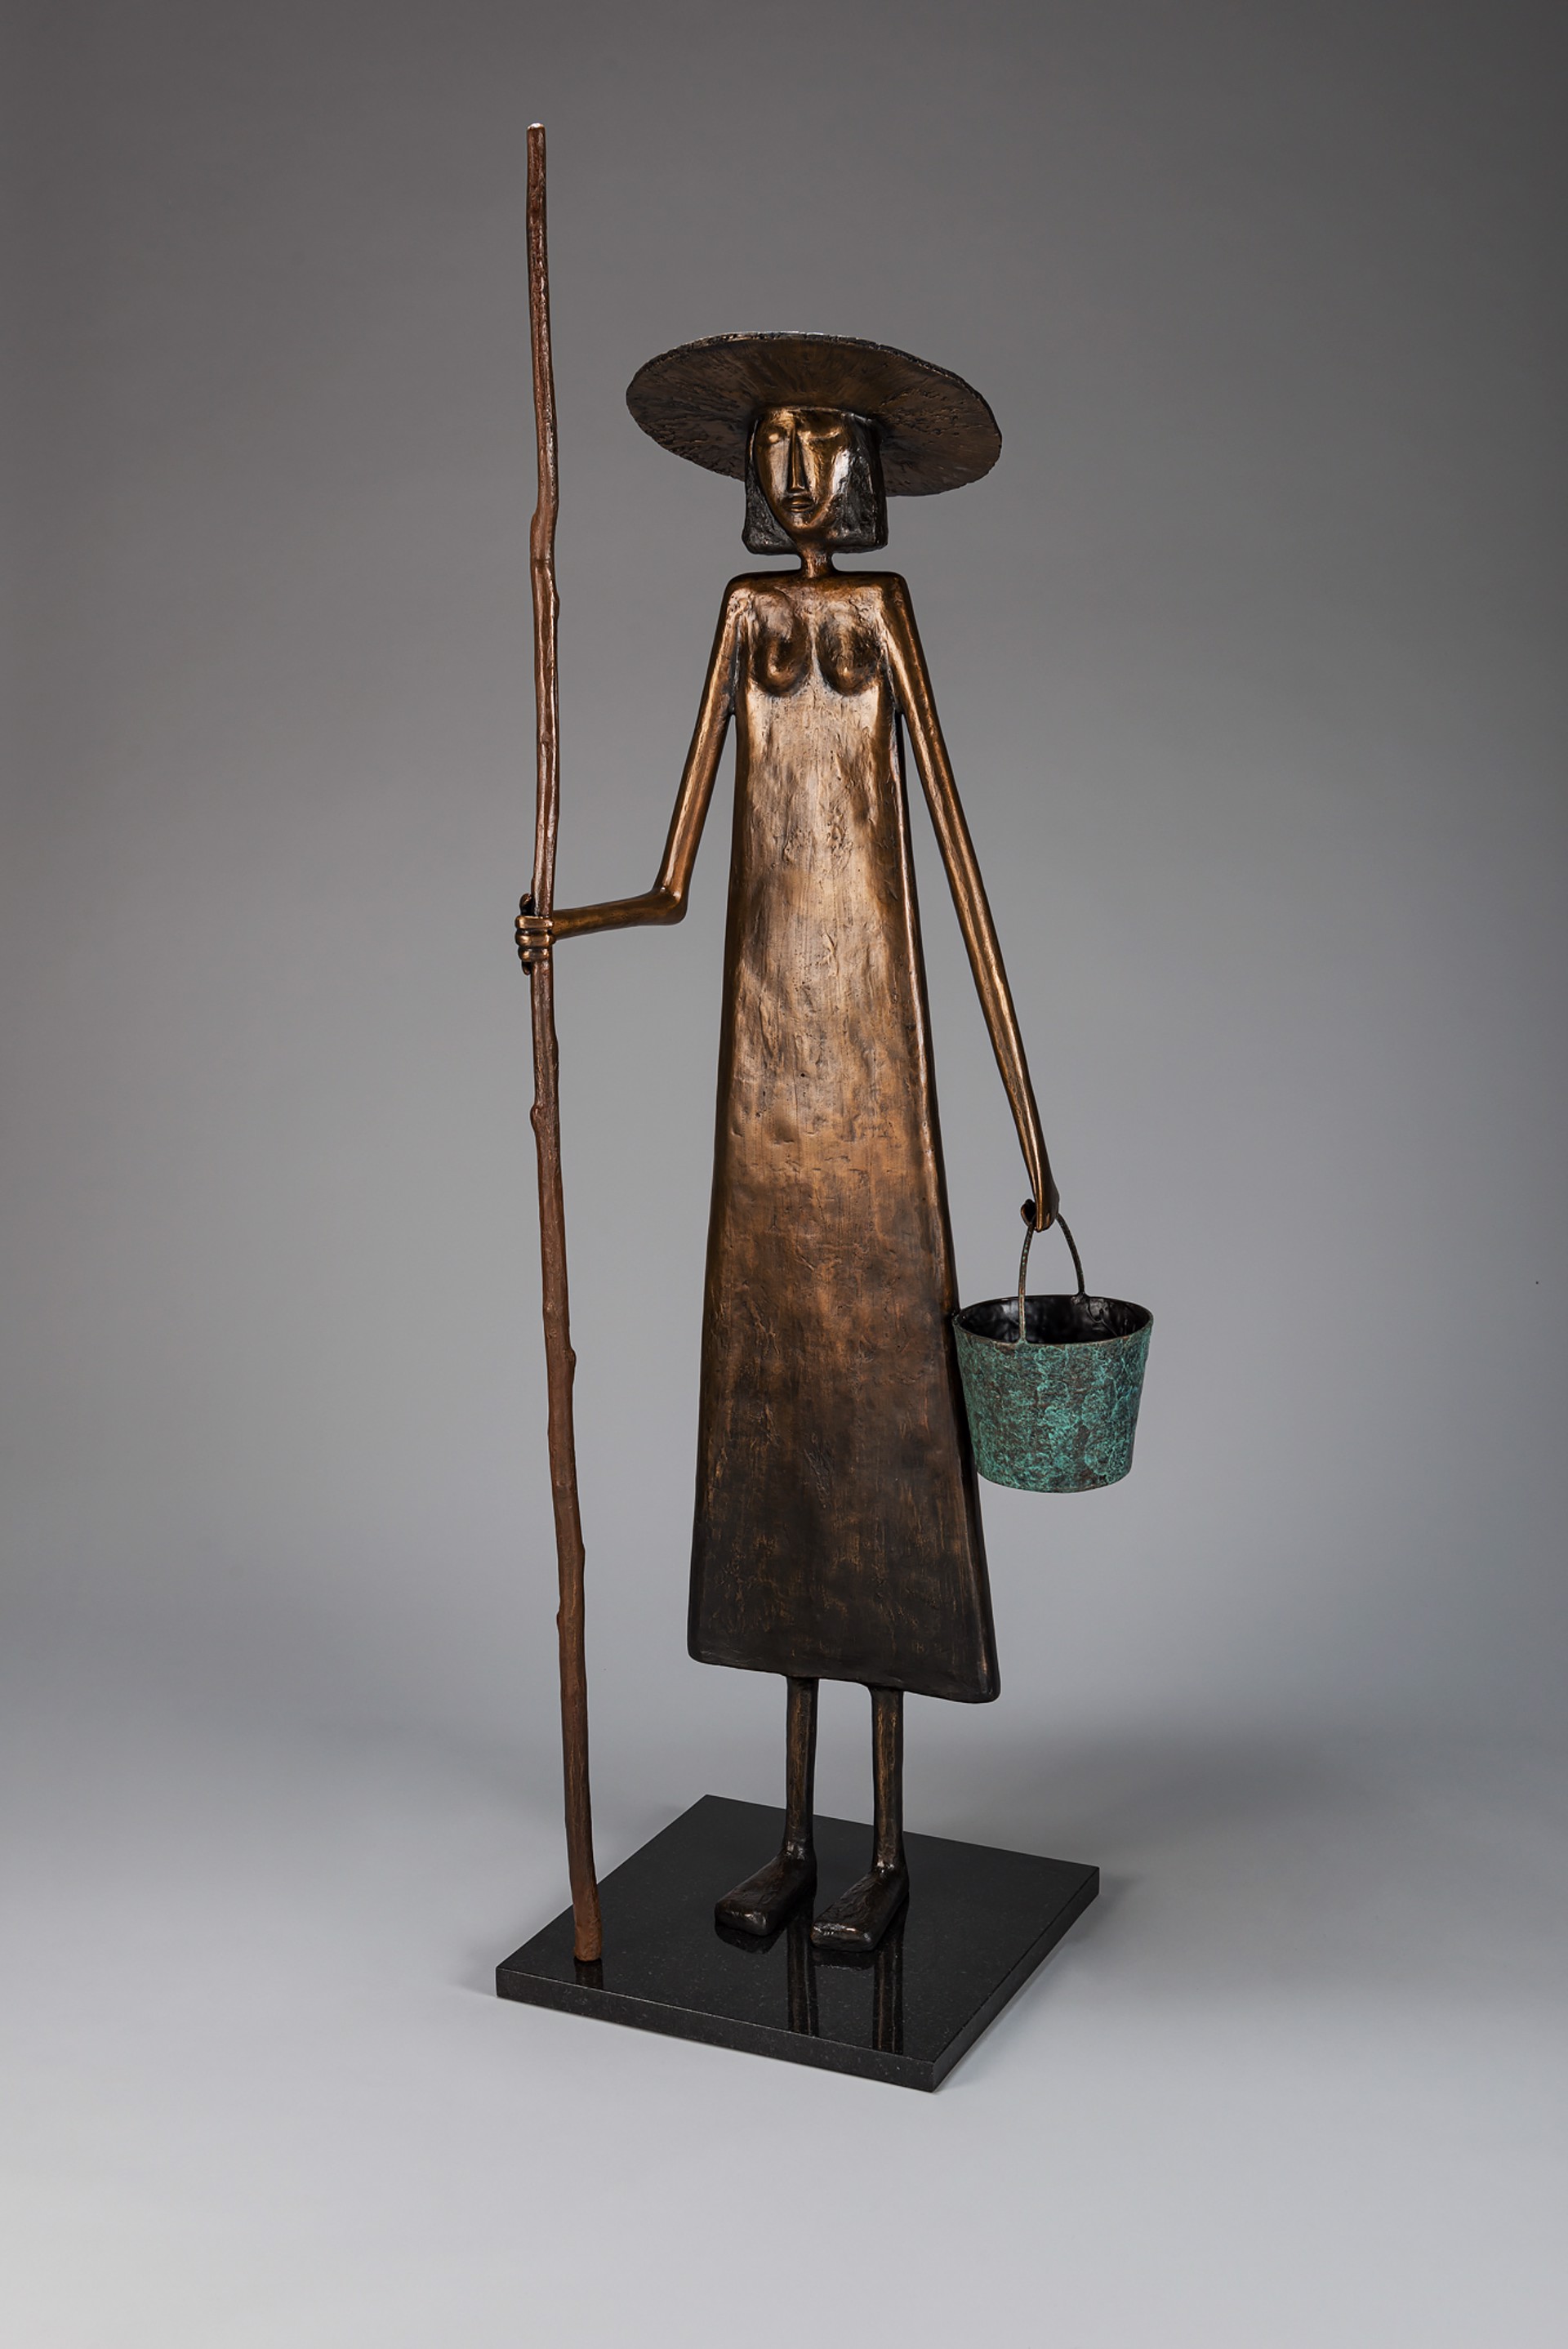 Woman With Staff and Pail by Allen Wynn